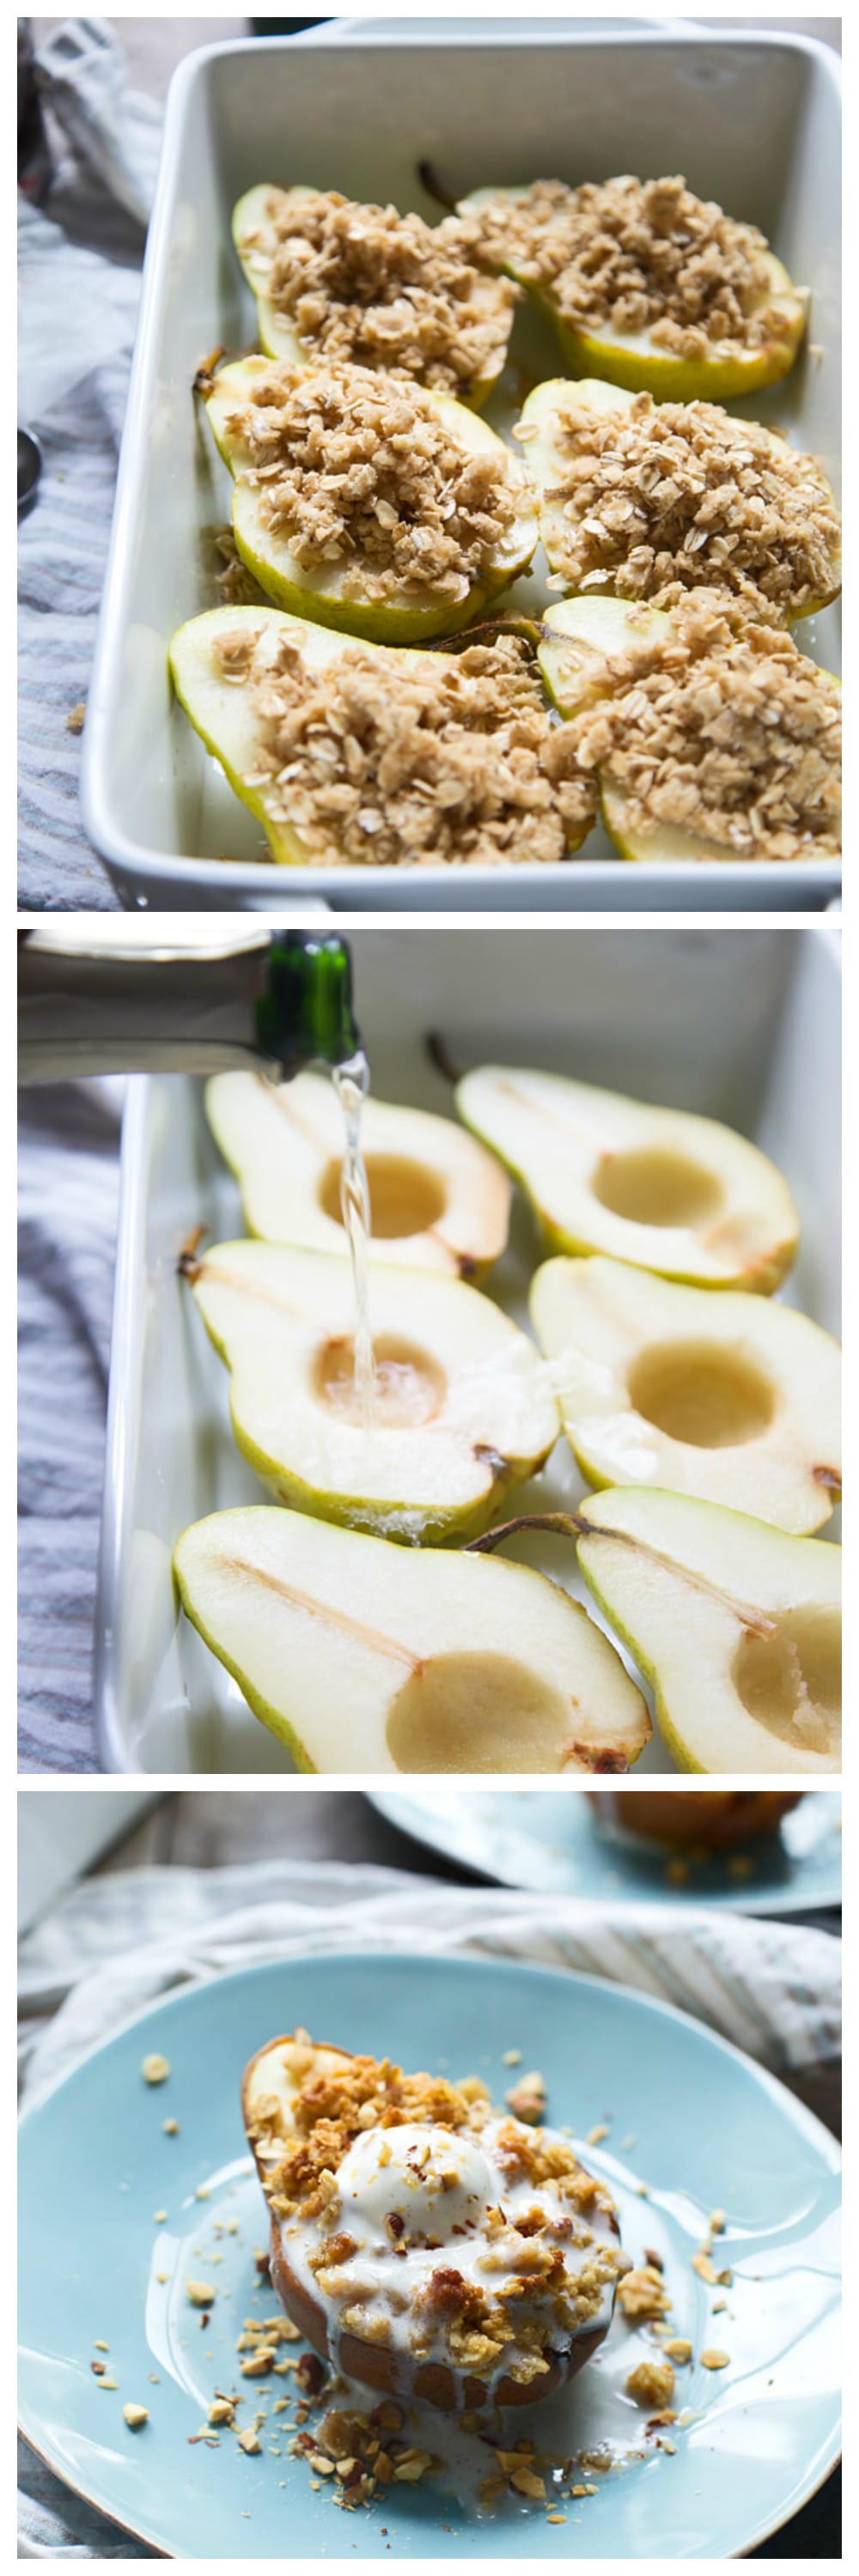 Baked Champagne Pears with Oat Almond Crumble